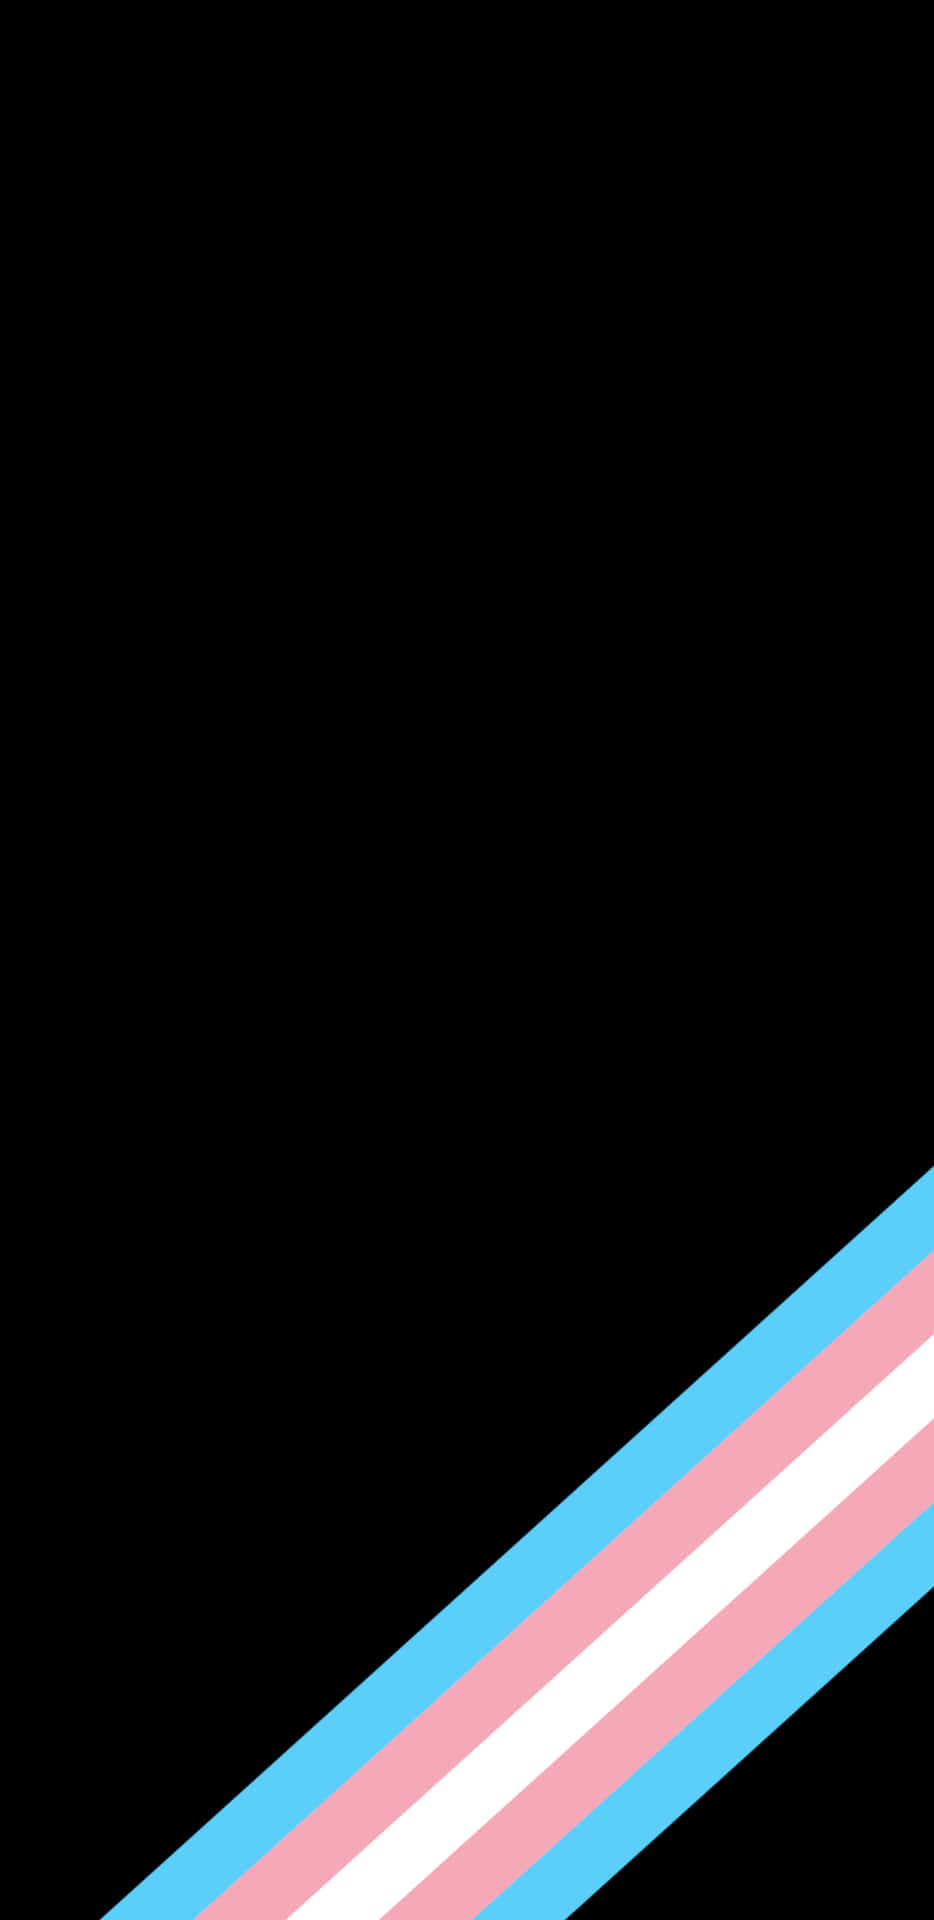 A Black And White Image Of A Transgender Flag Wallpaper